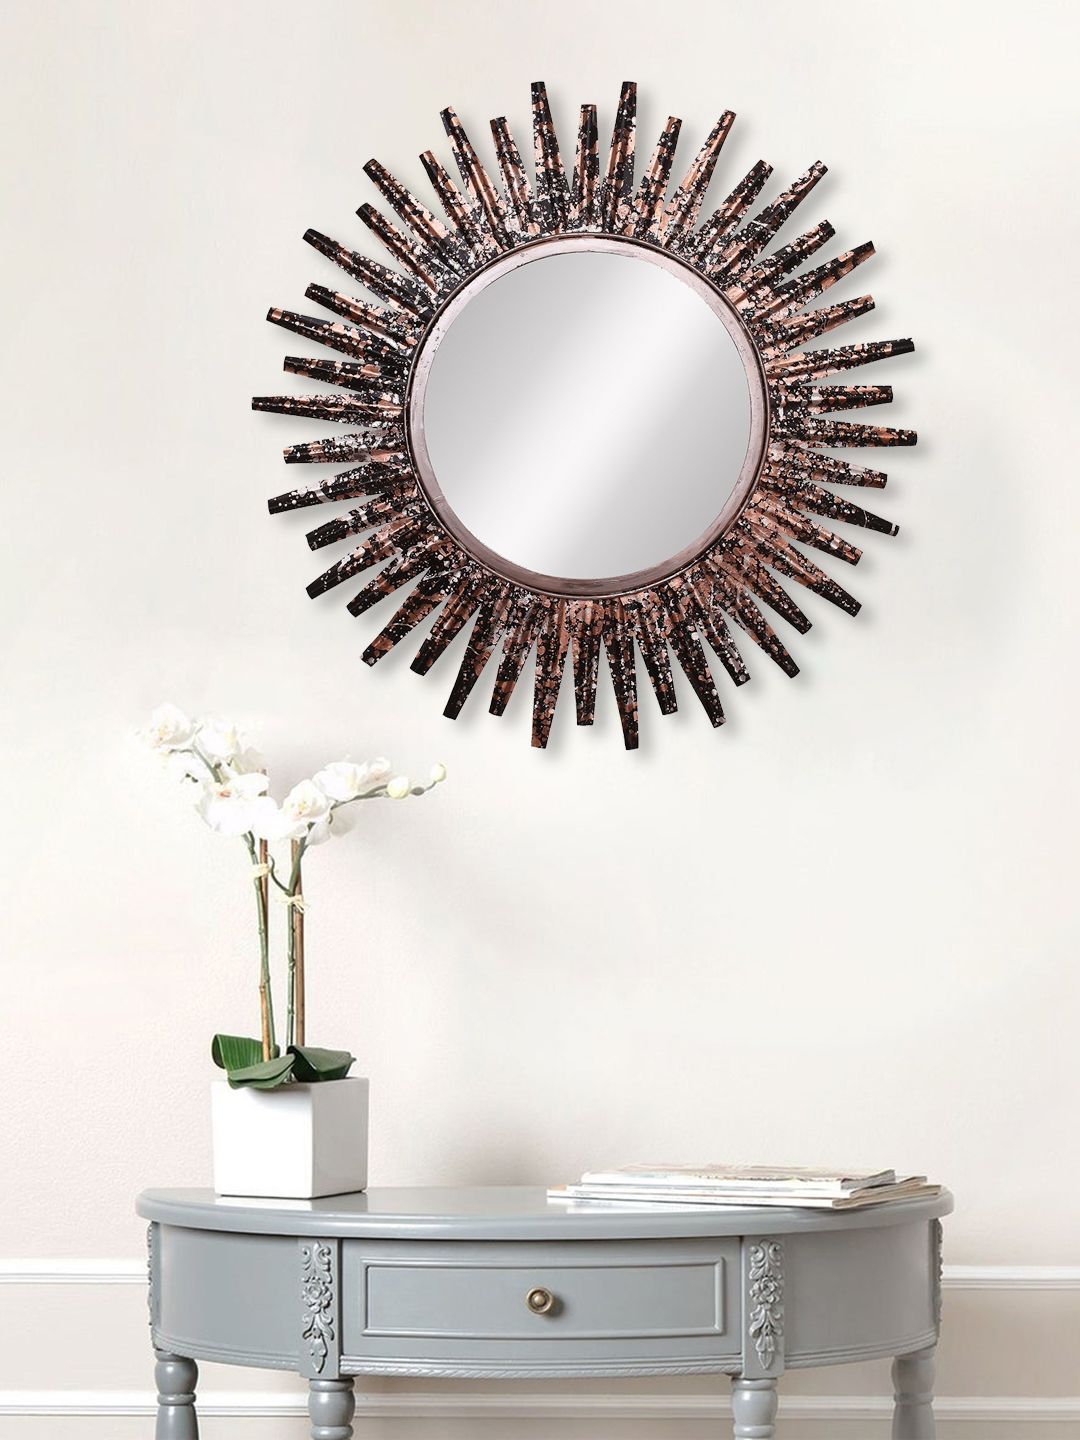 eCraftIndia Copper-Toned & Black Metal Decorative Handcarved Wall Mirror Price in India